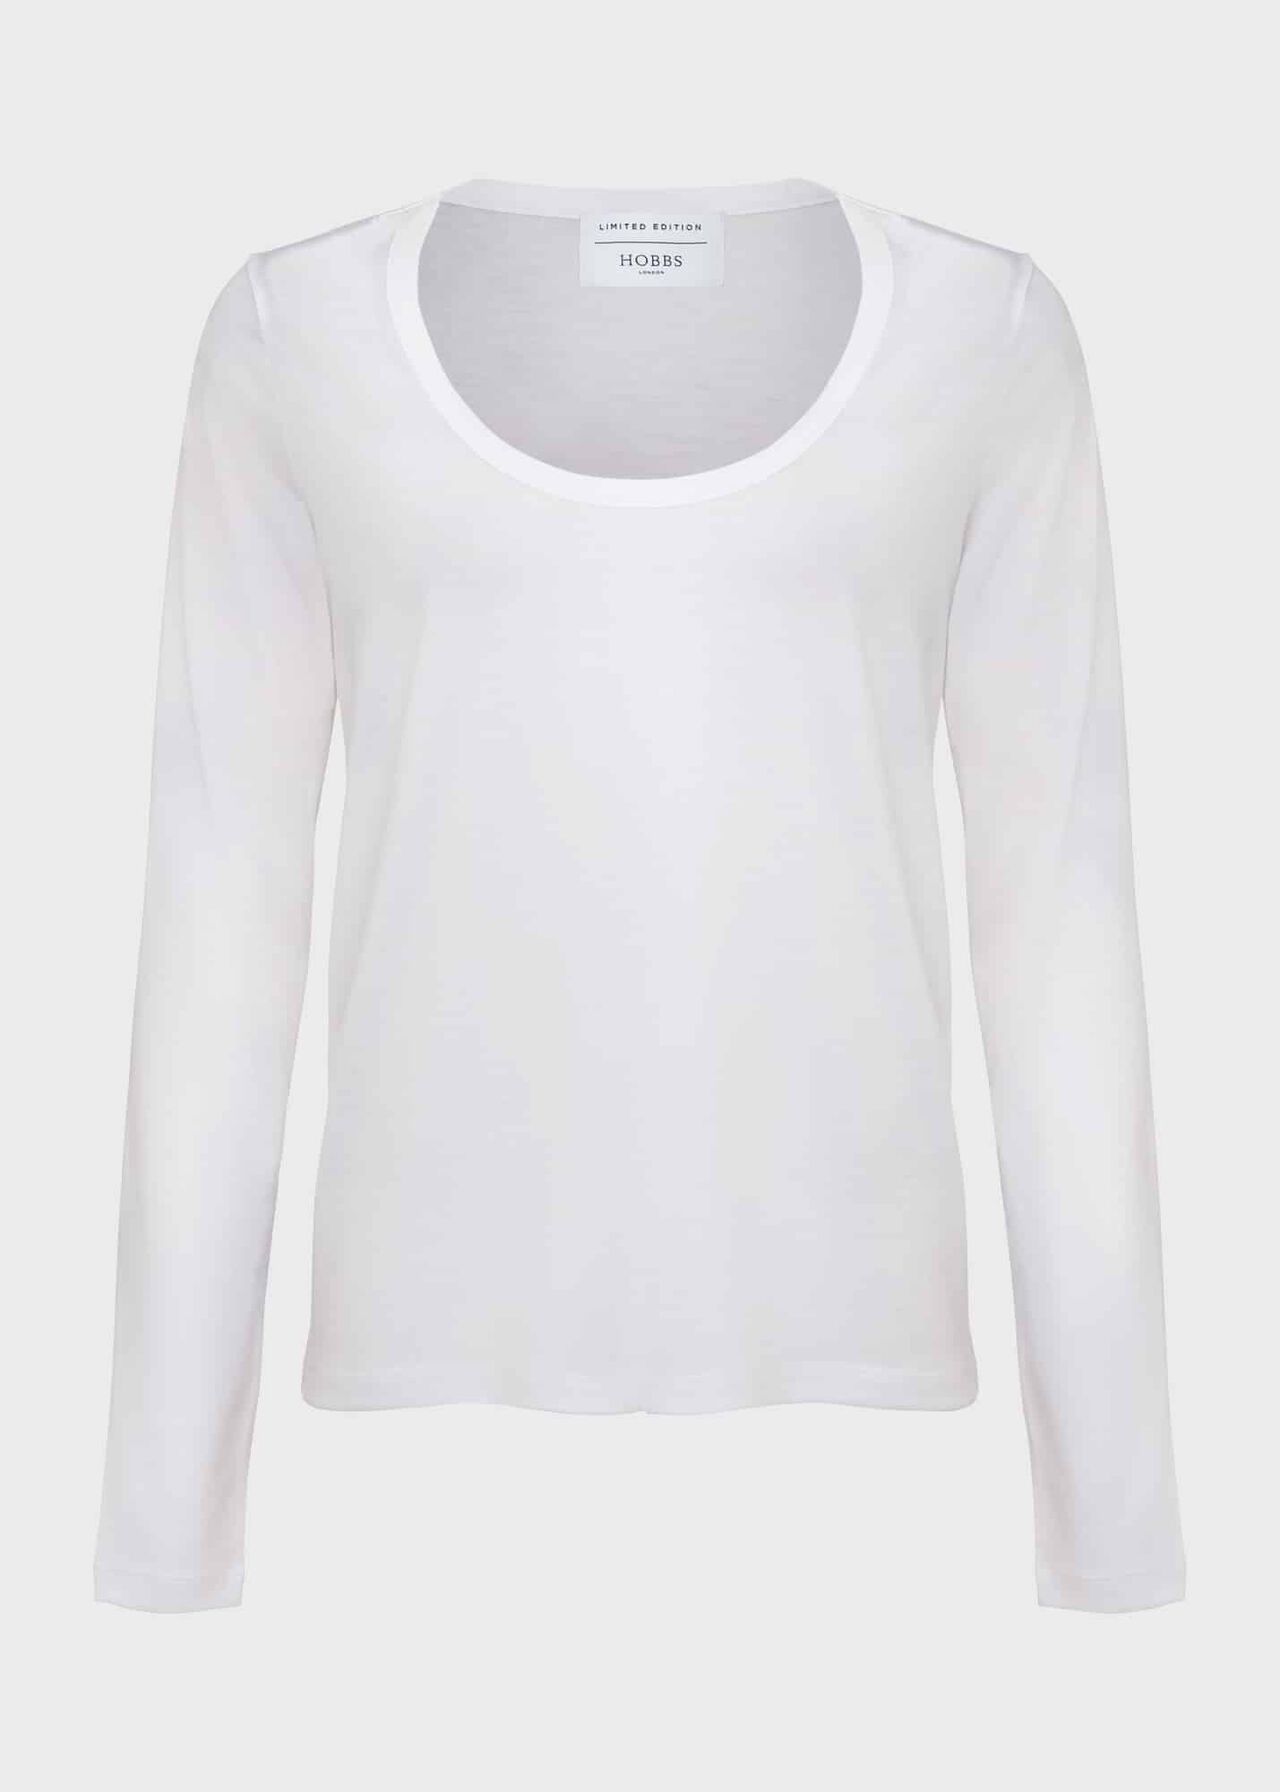 Foster Top, White, hi-res